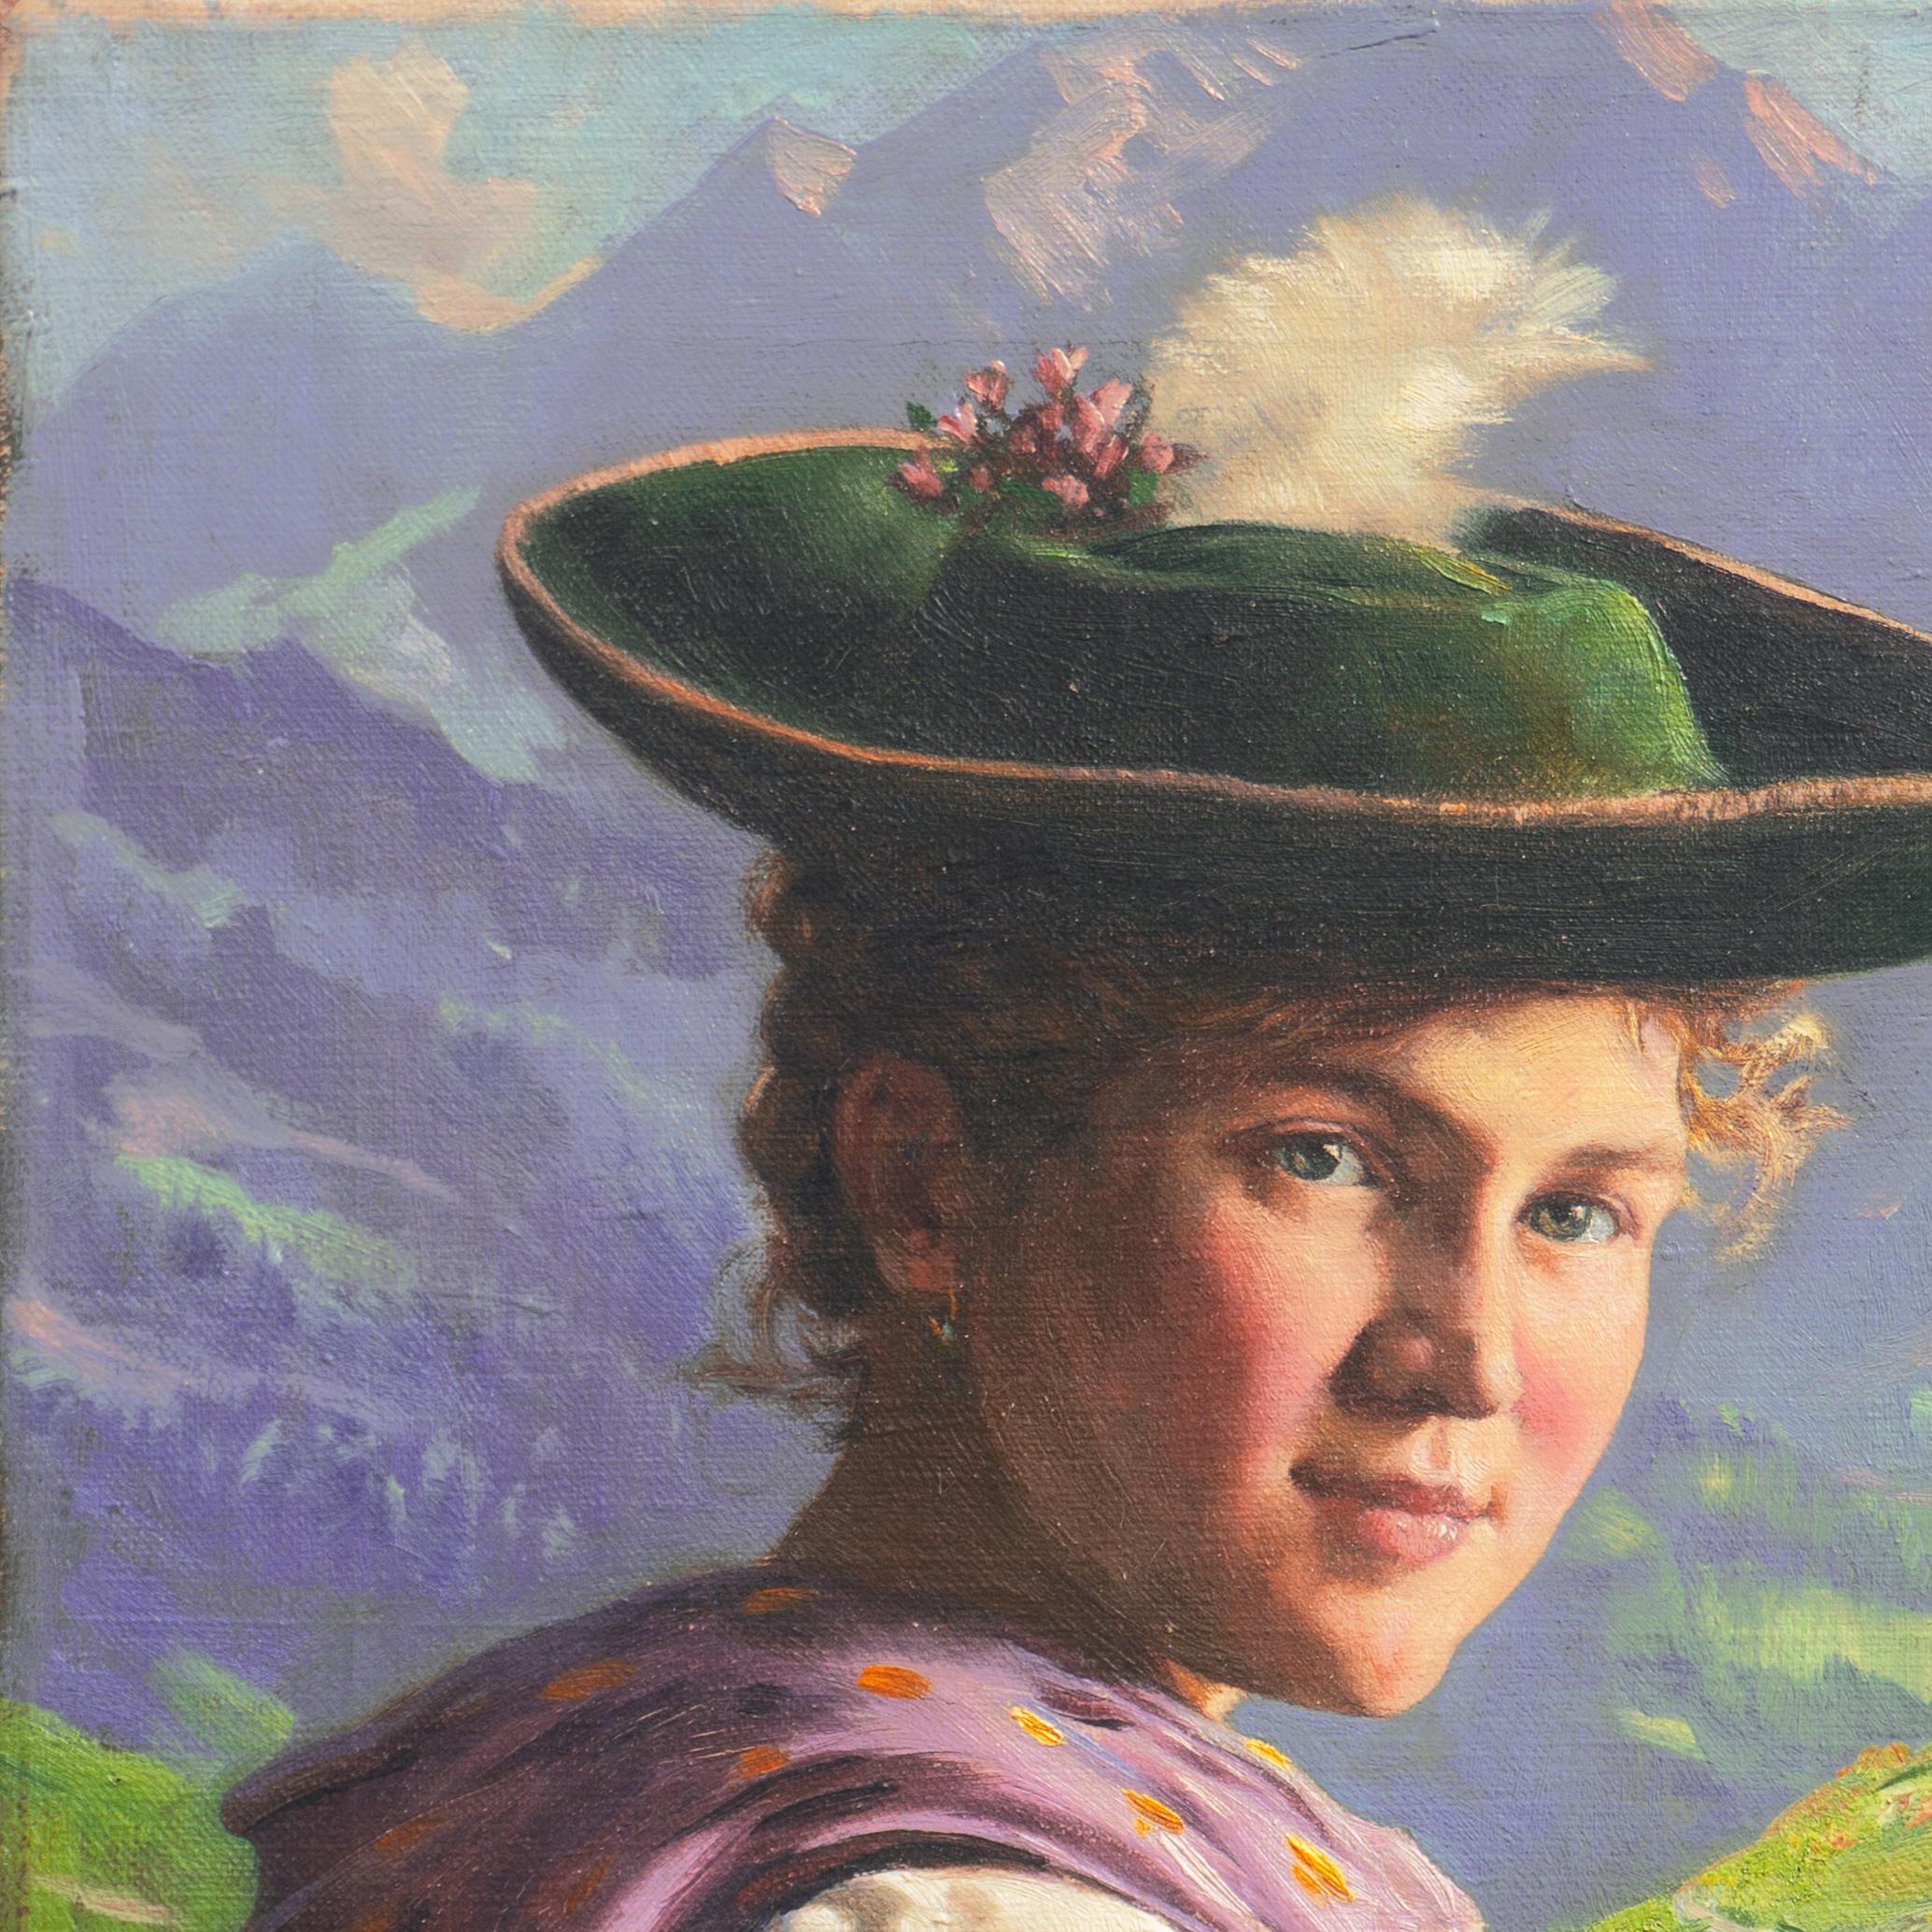 Signed lower left 'E. Rau' for Emil Rau (German, 1858-1937) and painted circa 1915.

An exquisite, jewel-like study of a young Bavarian girl, wearing an embroidered blouse, lilac sash and green felt hat with feather, and shown seated on a carved